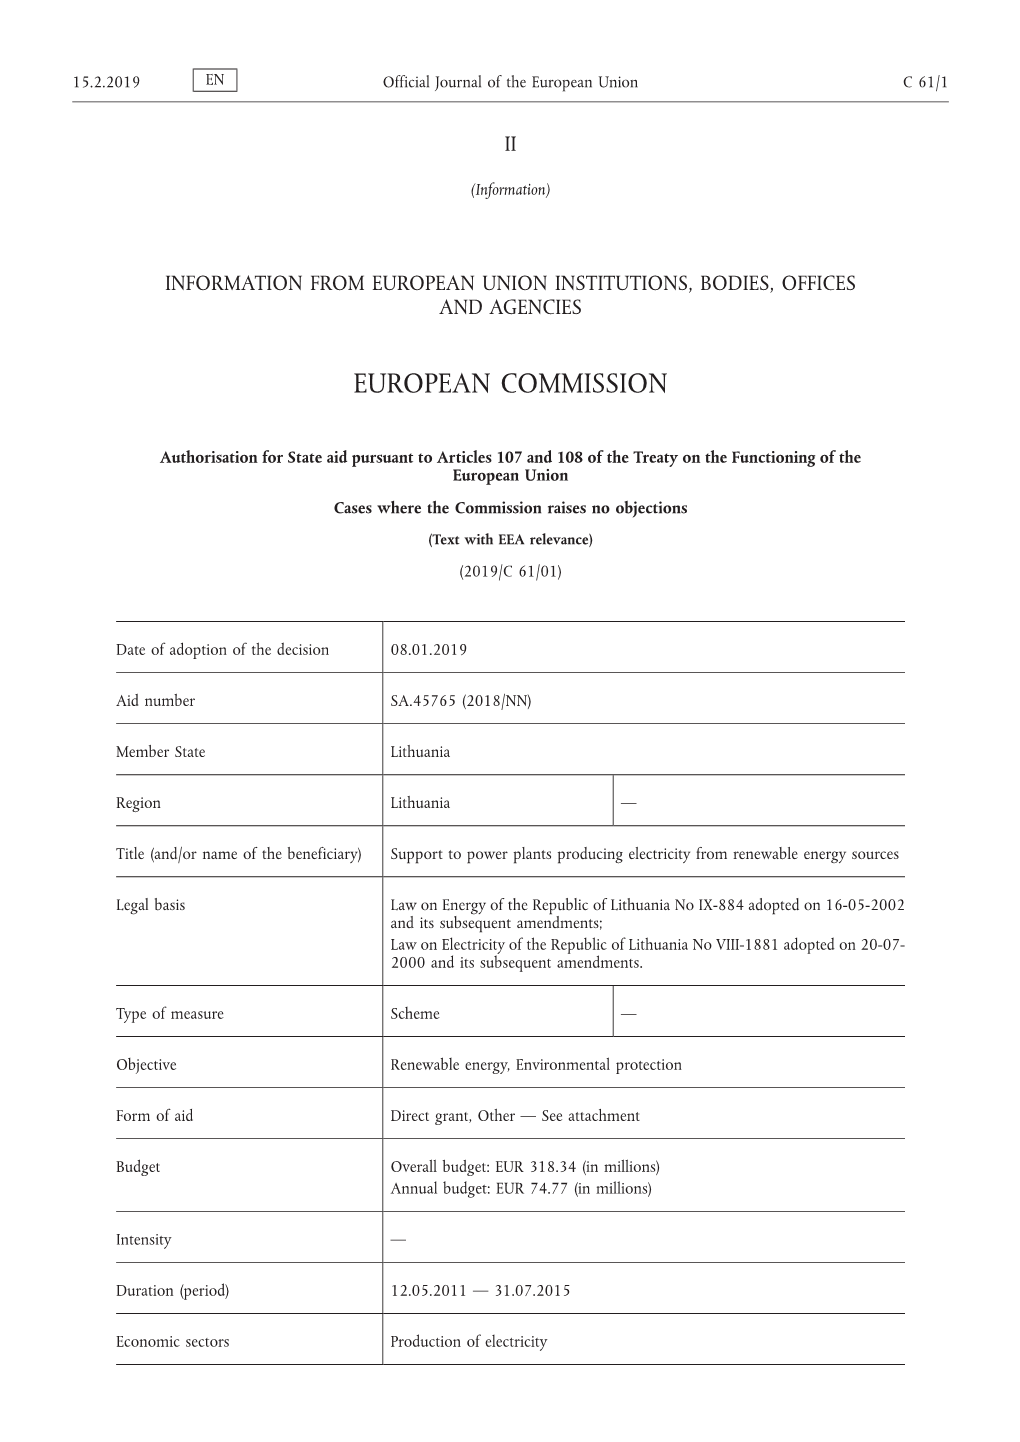 Authorisation for State Aid Pursuant to Articles 107 and 108 of the Treaty on the Functioning of the European Union Cases Where the Commission Raises No Objections